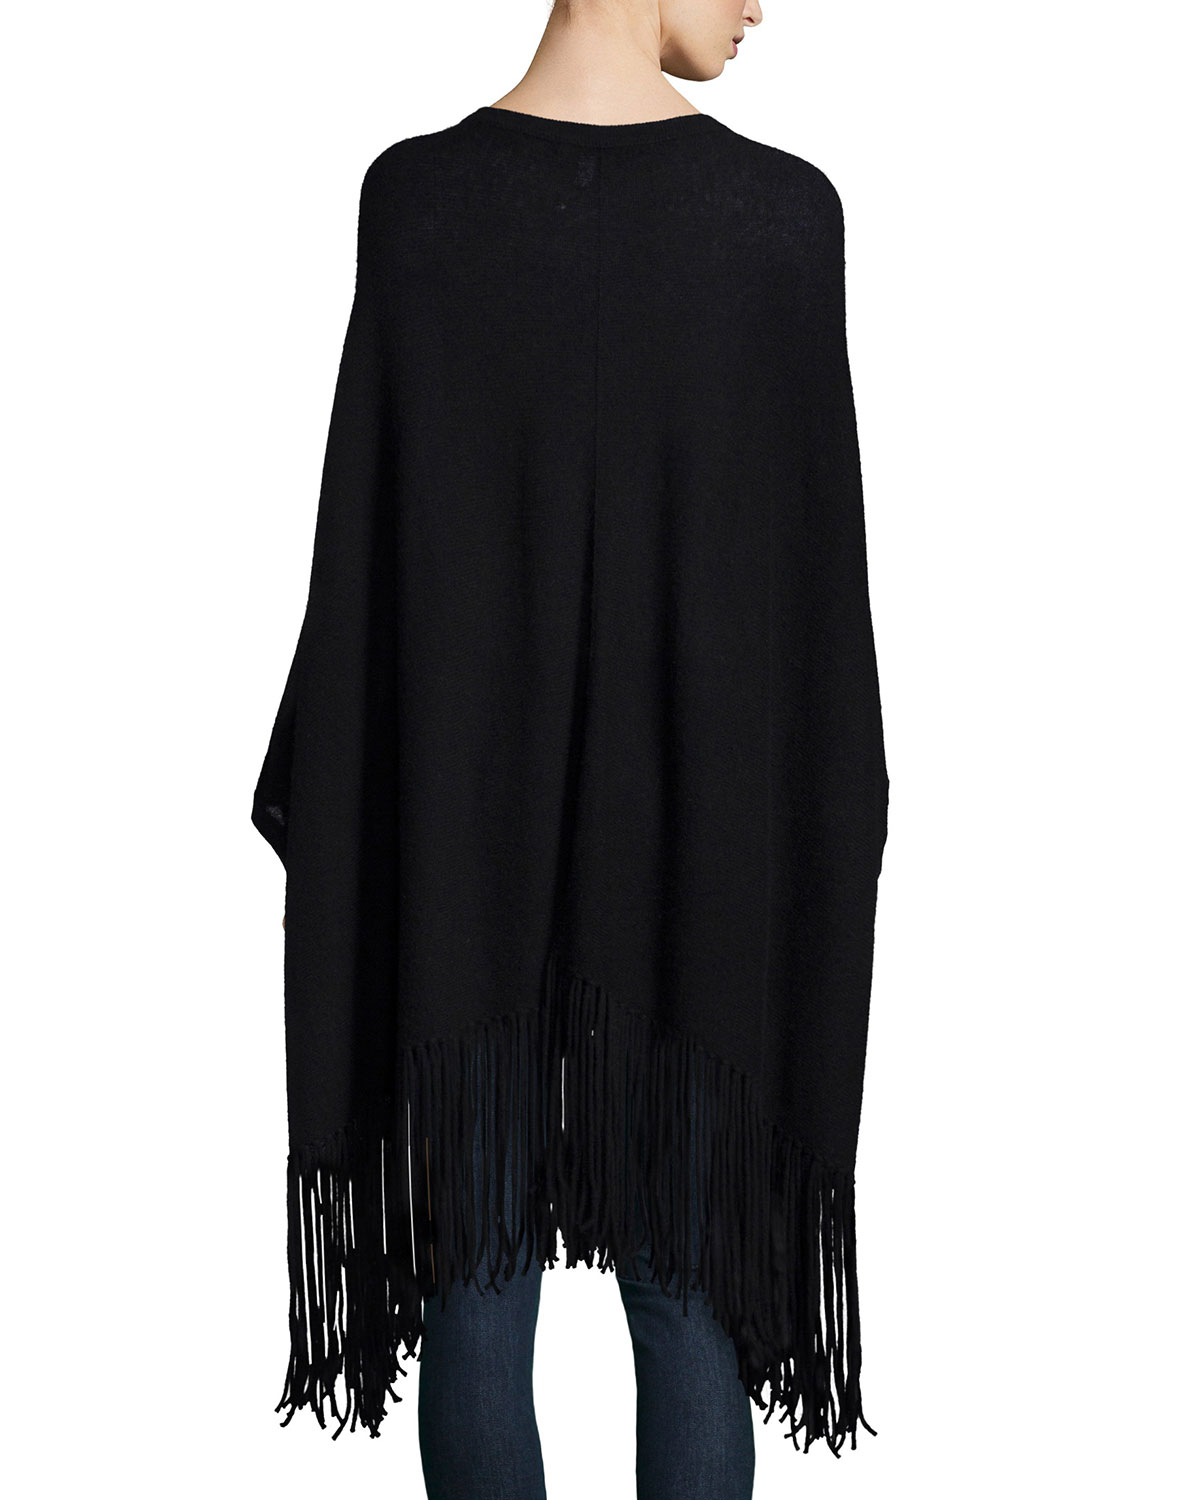 poncho with sleeves